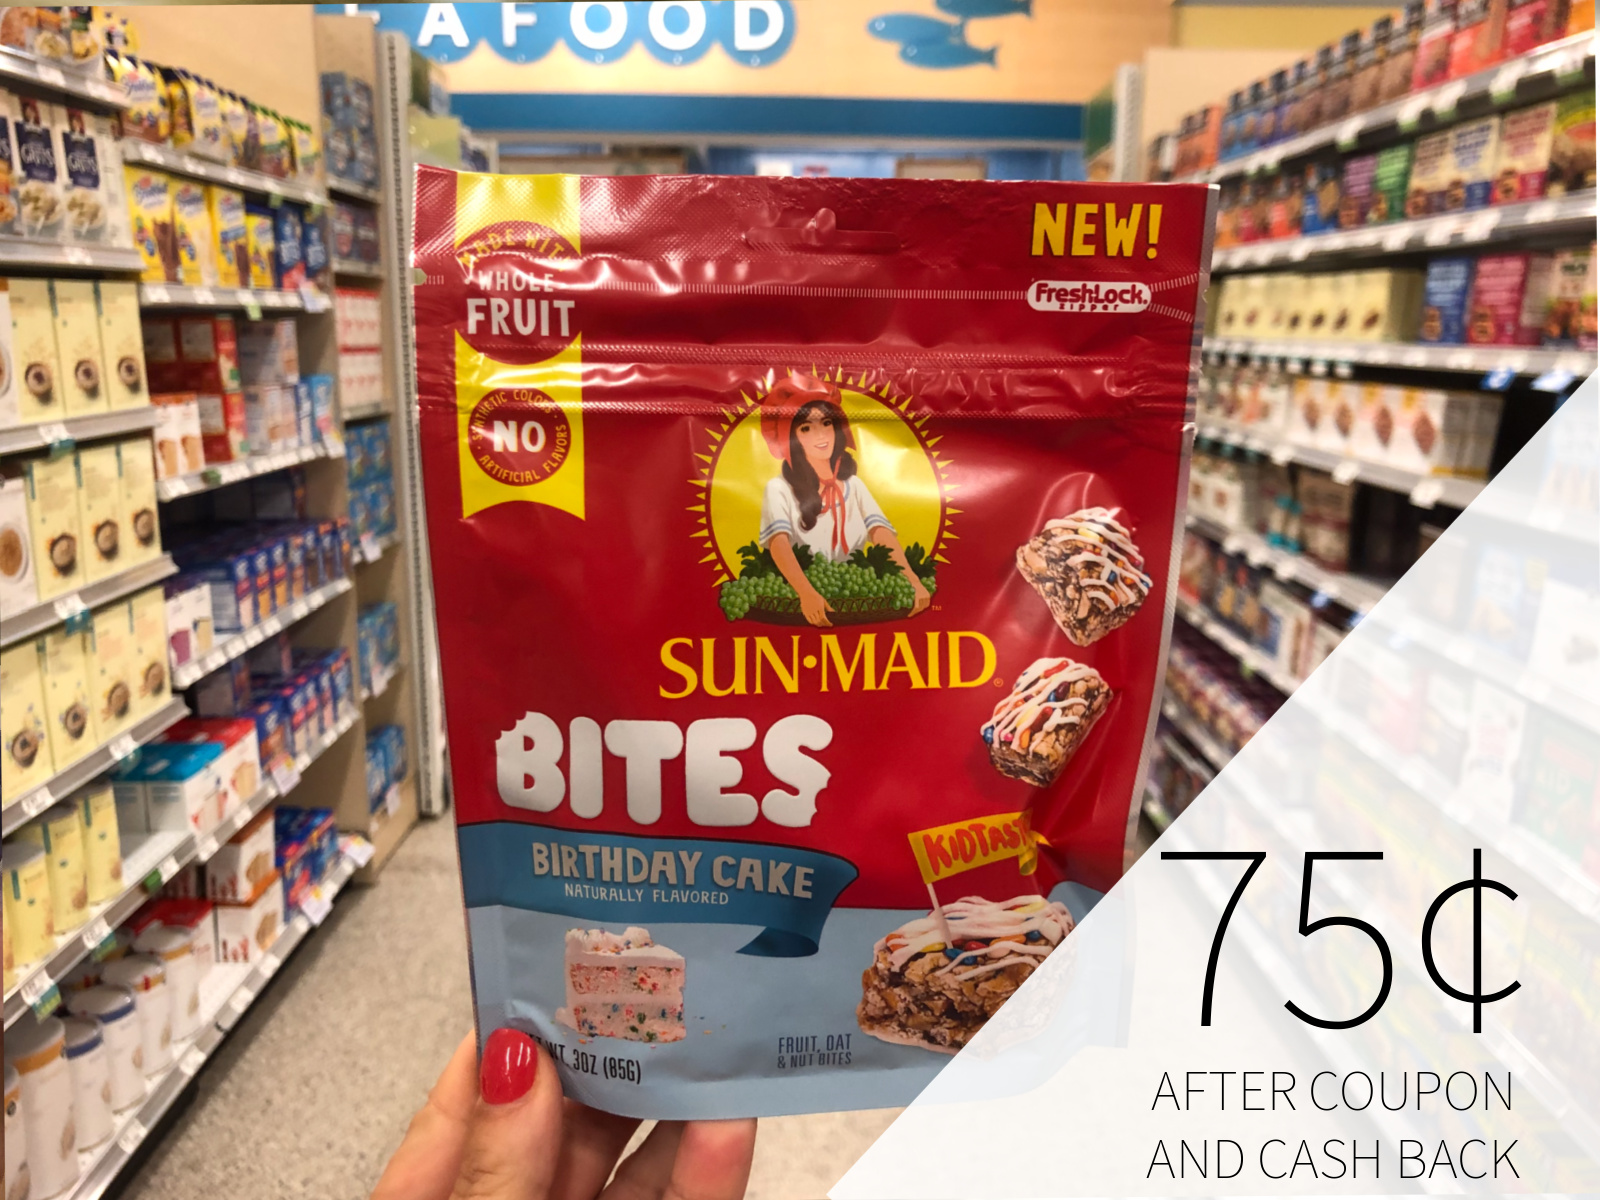 Try New Sun-Maid Bites At A HUGE Discount + A Giveaway (Four Readers Will Win A $50 Publix Gift Card) on I Heart Publix 2